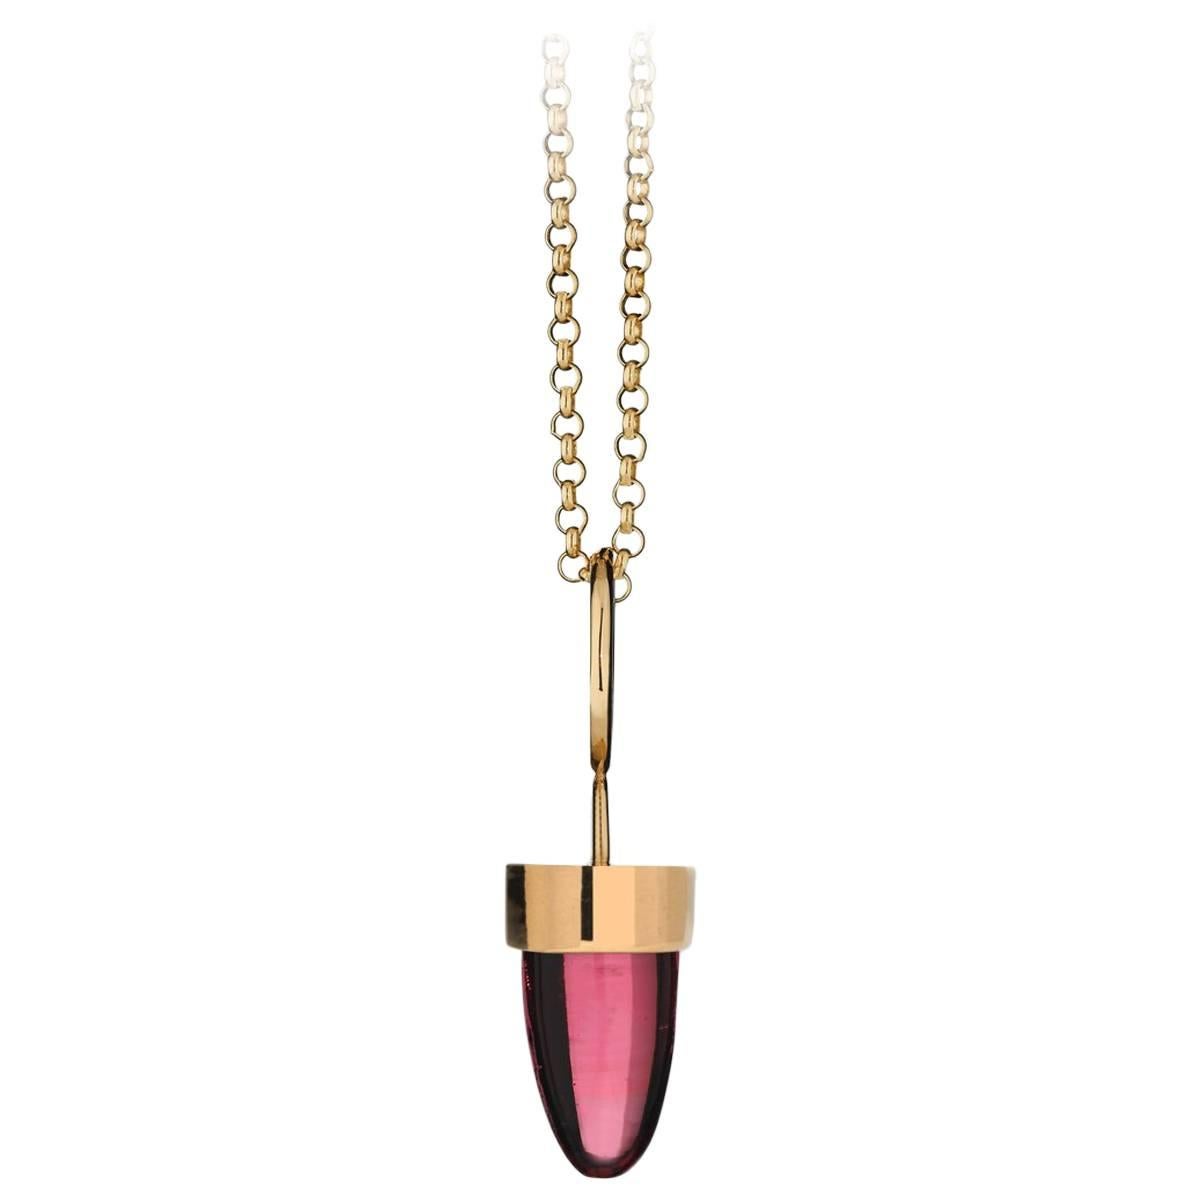 Colour stone modern Pink stone Quartz 18 kt Yellow solid Gold Pendant necklace  For Sale